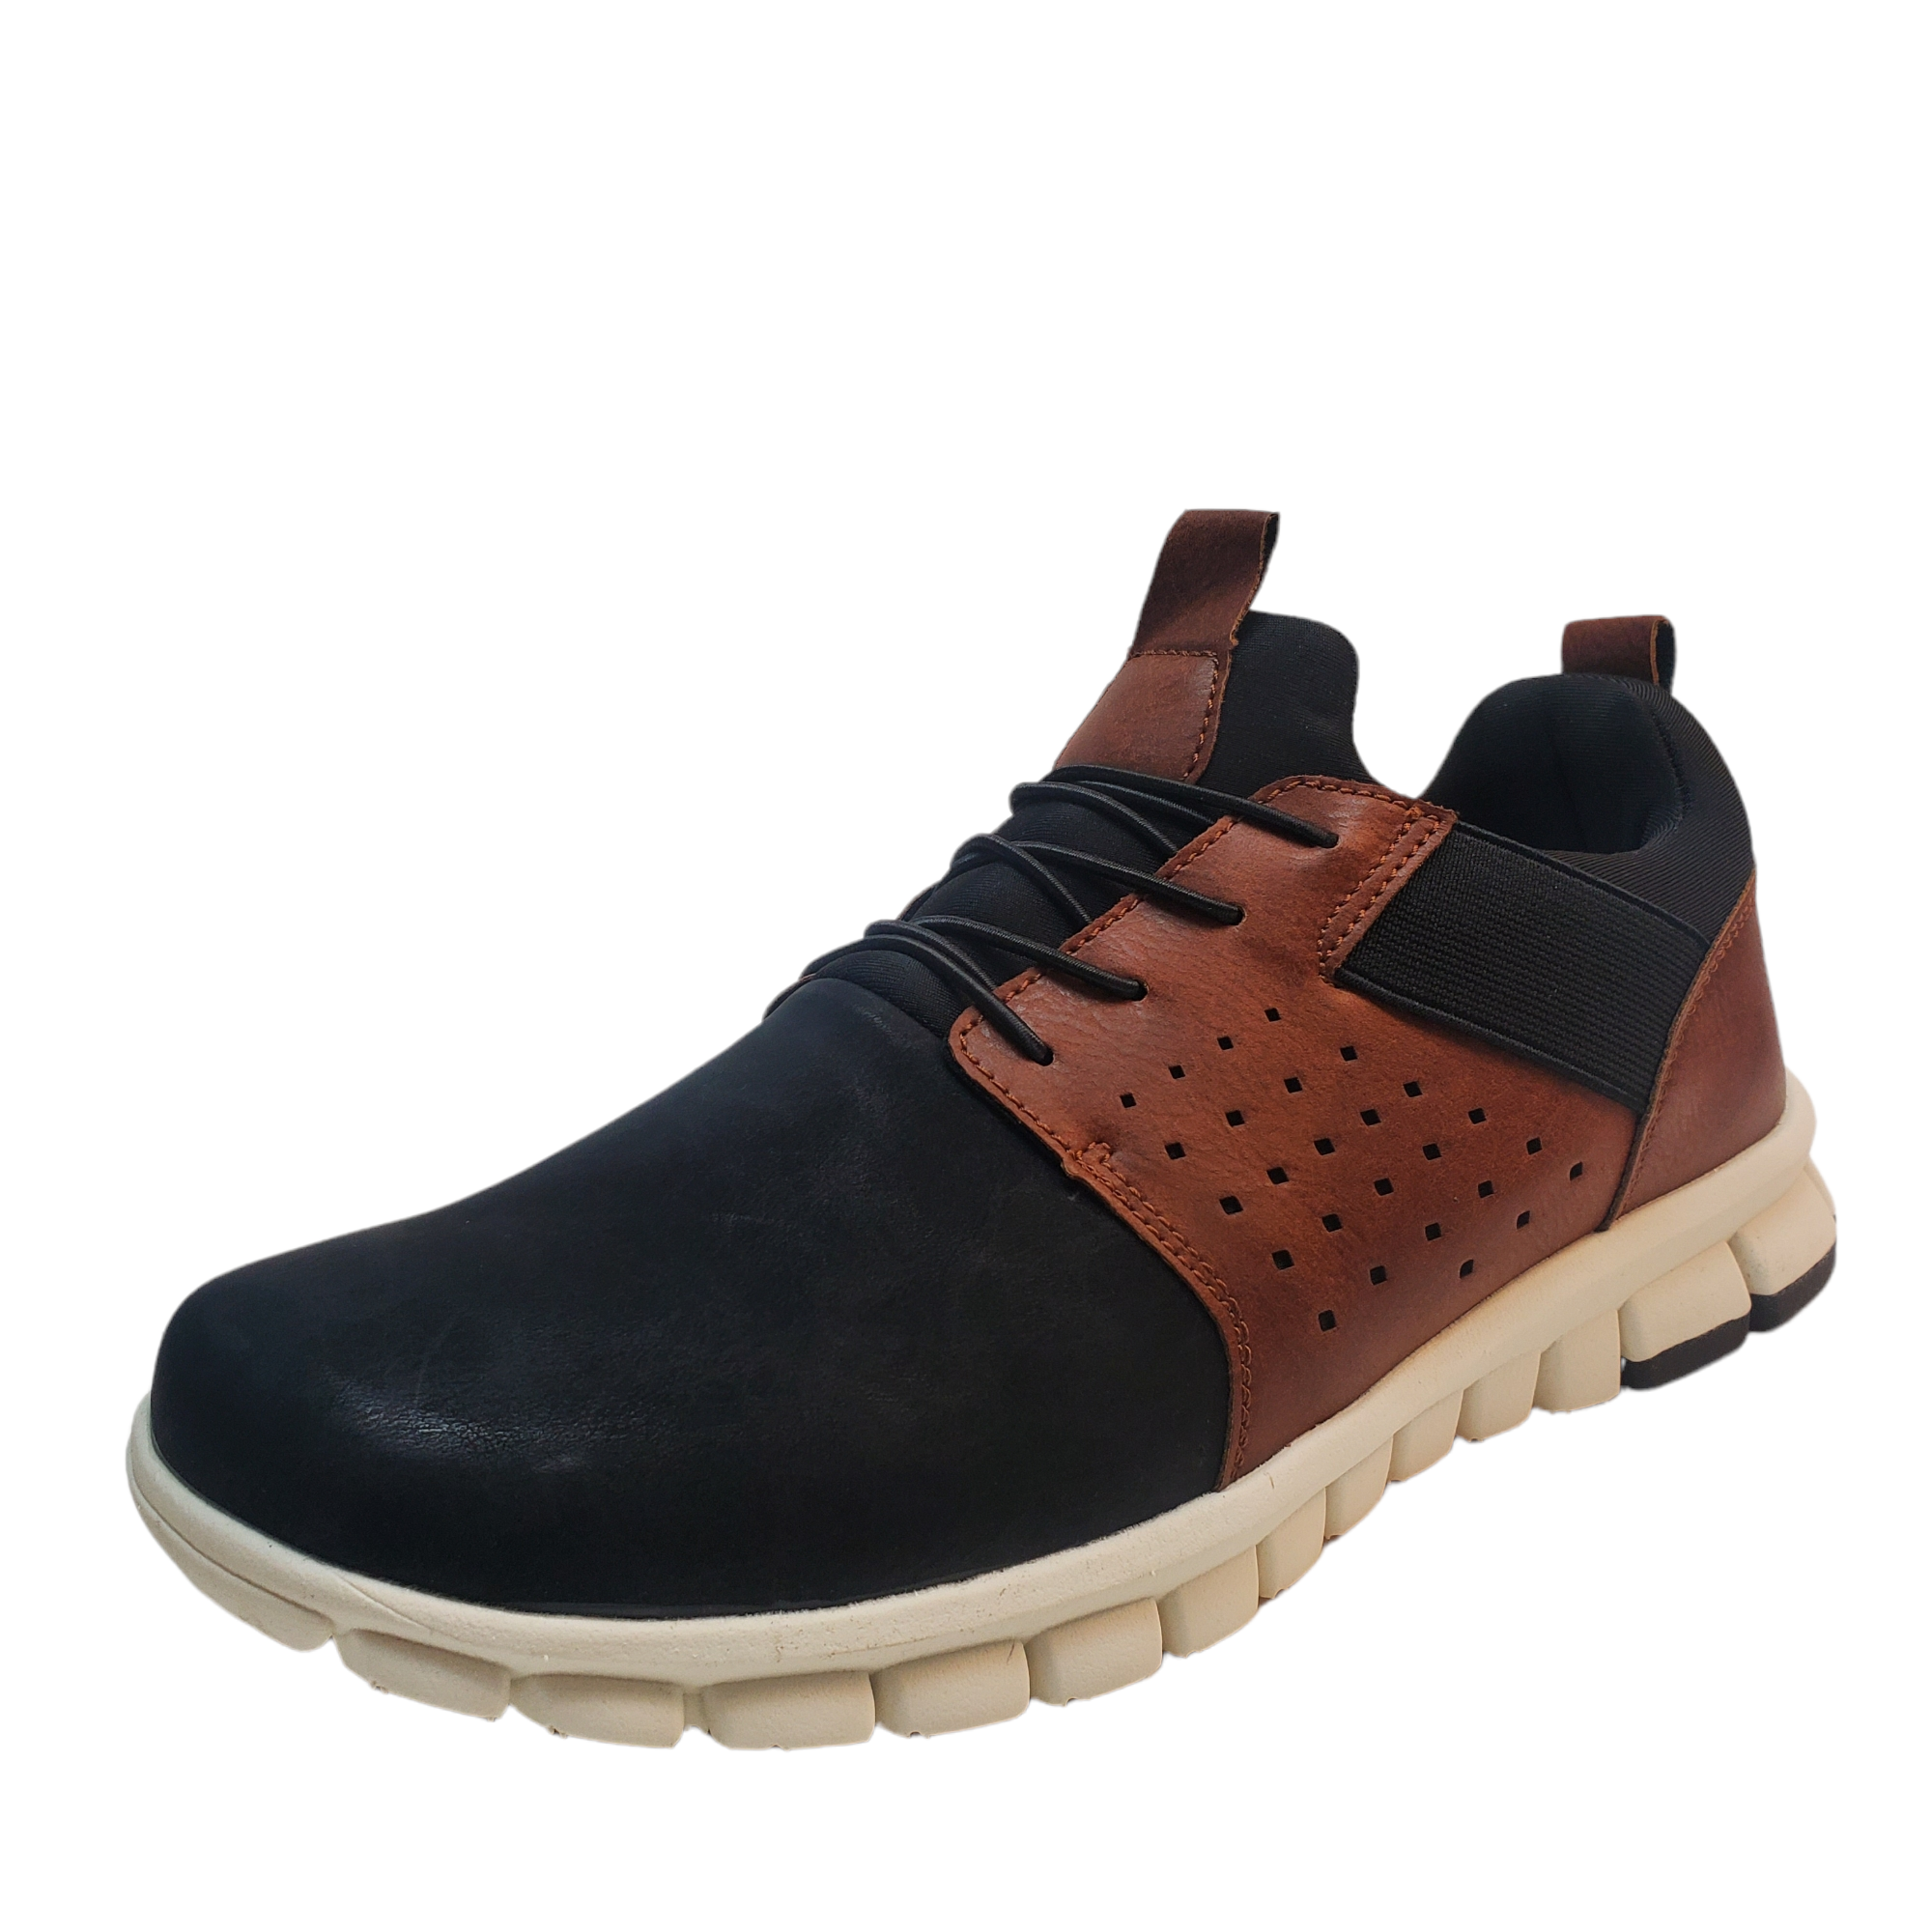 UR stylish casual shoes for men